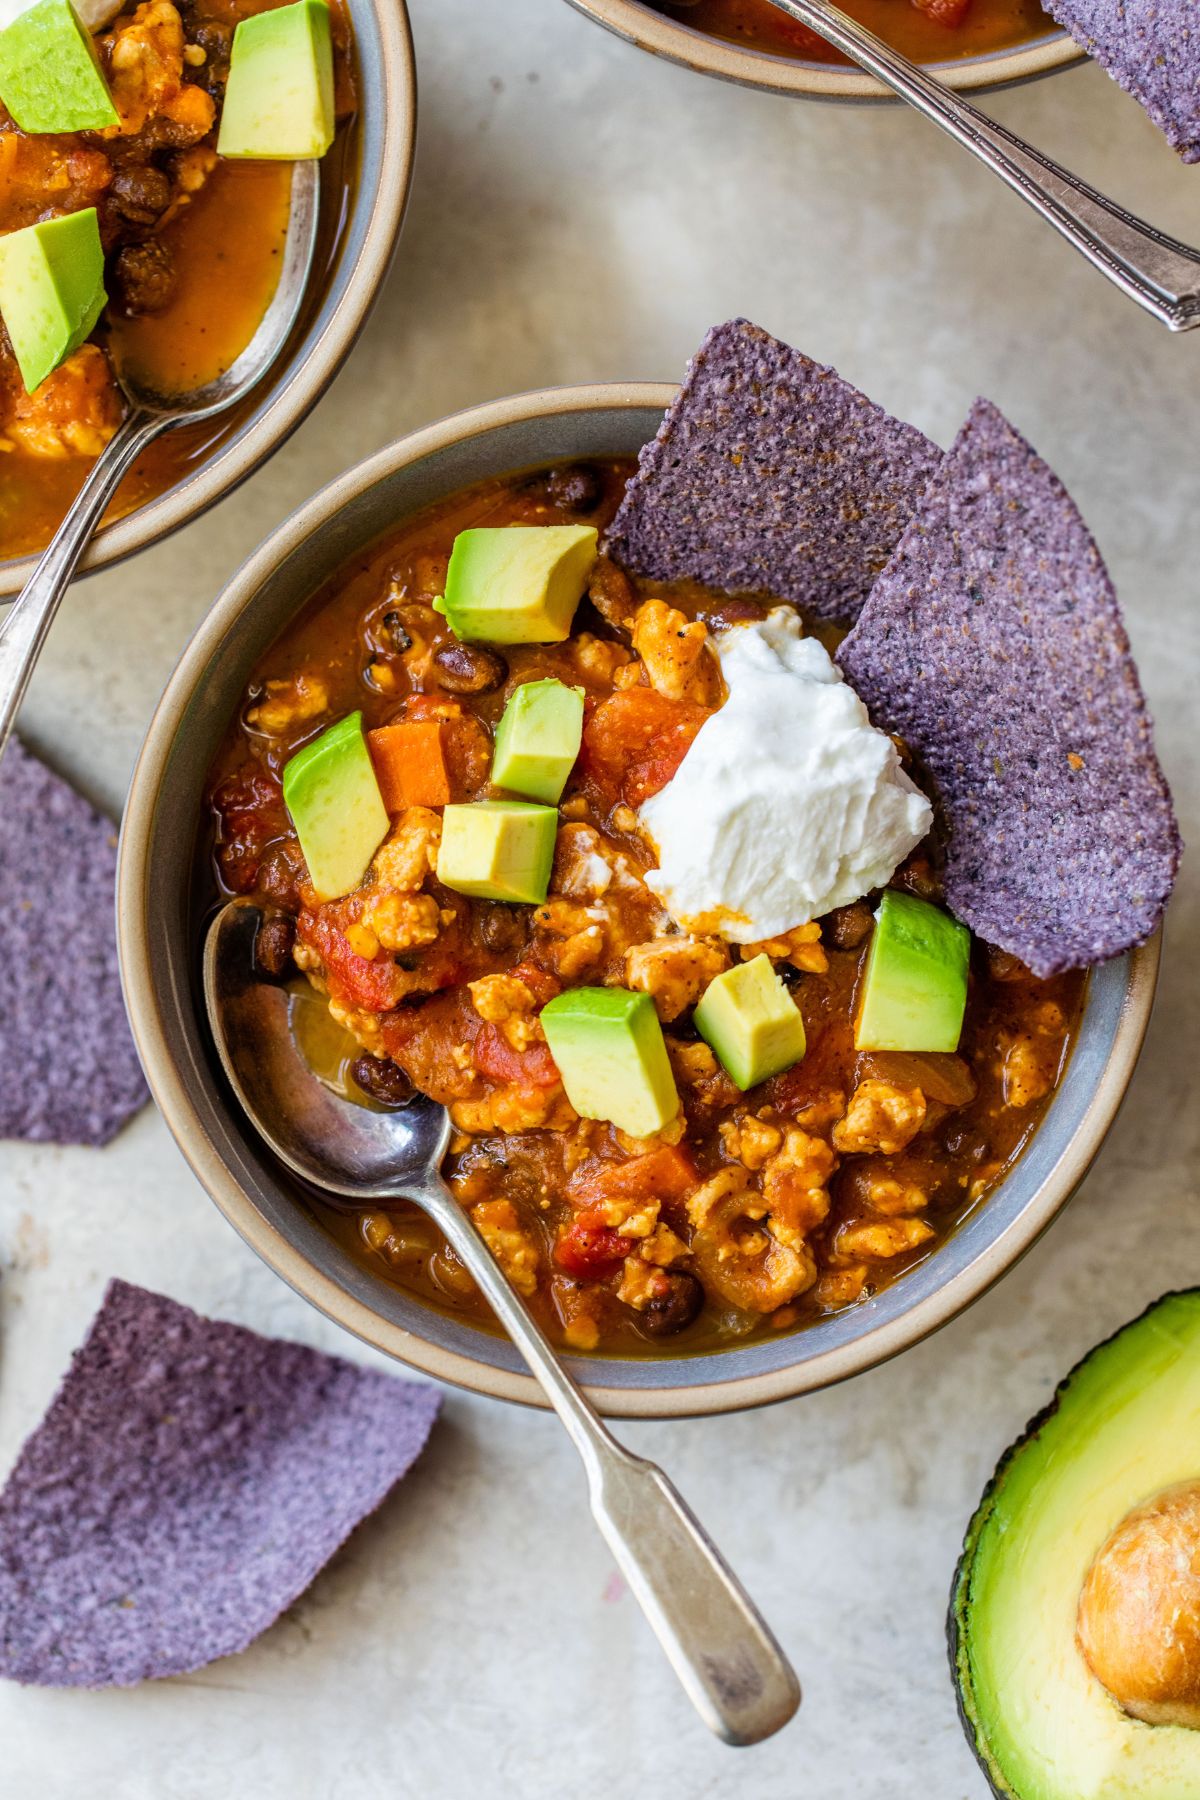 Turkey Pumpkin Chili served with avocado and tortilla chips.